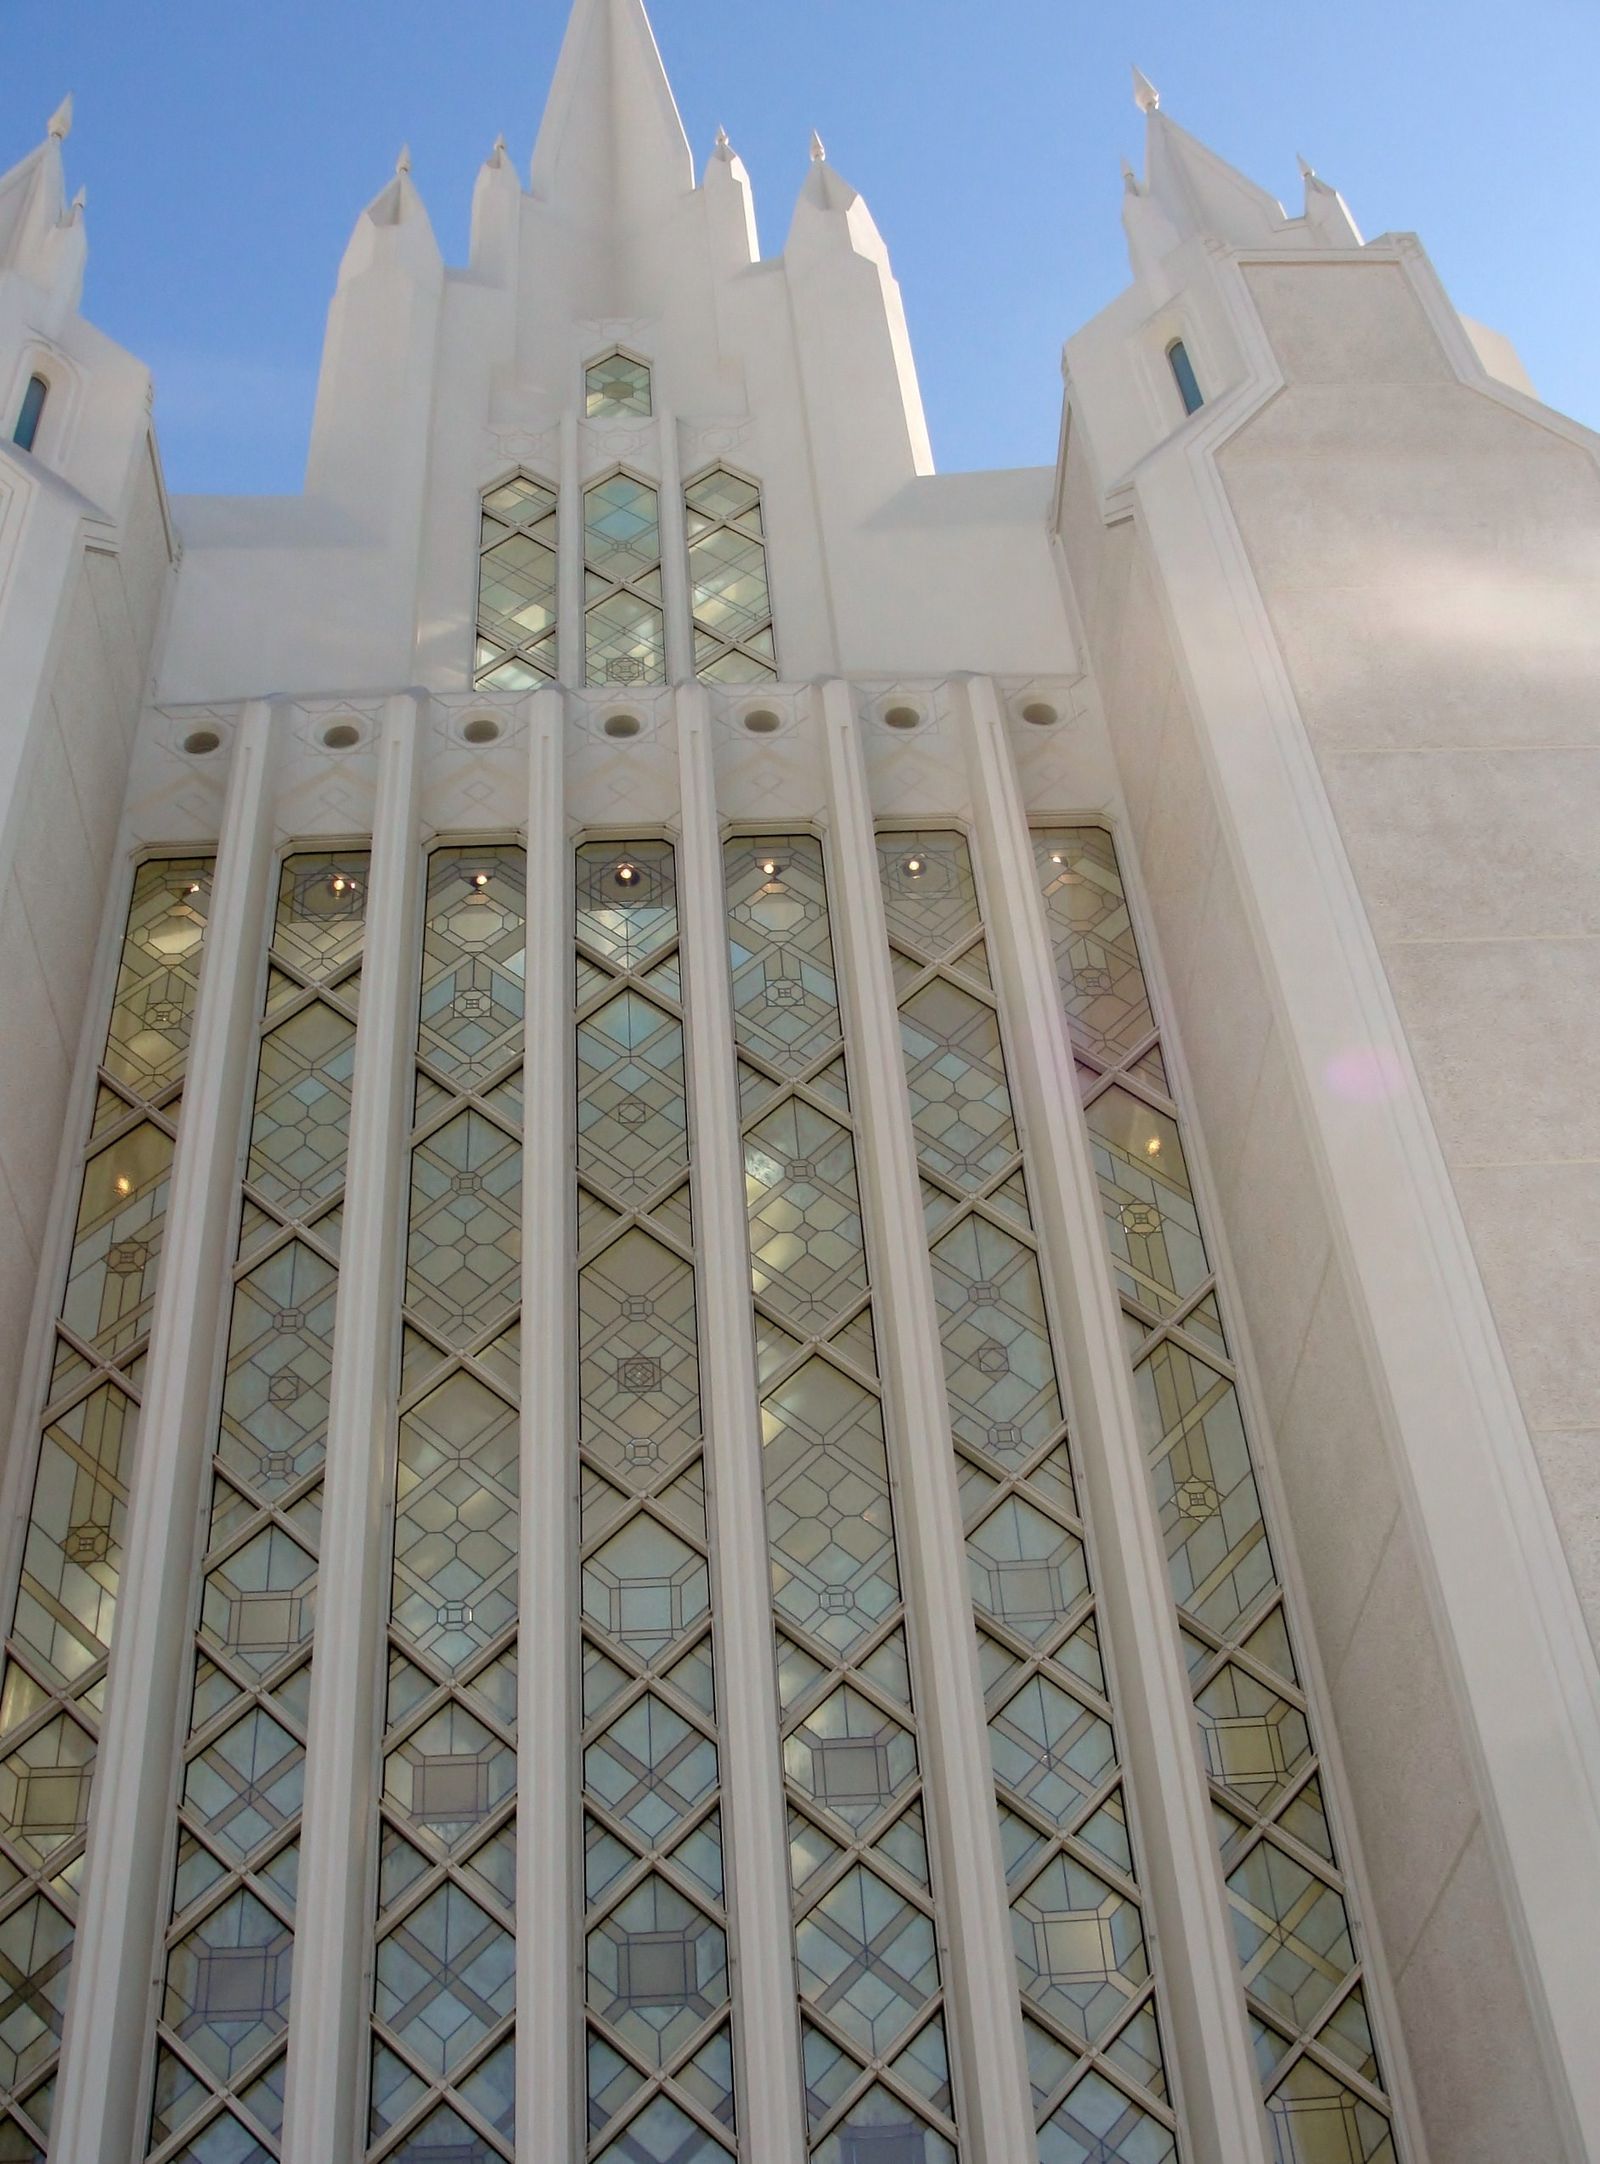 A window of the San Diego California Temple.